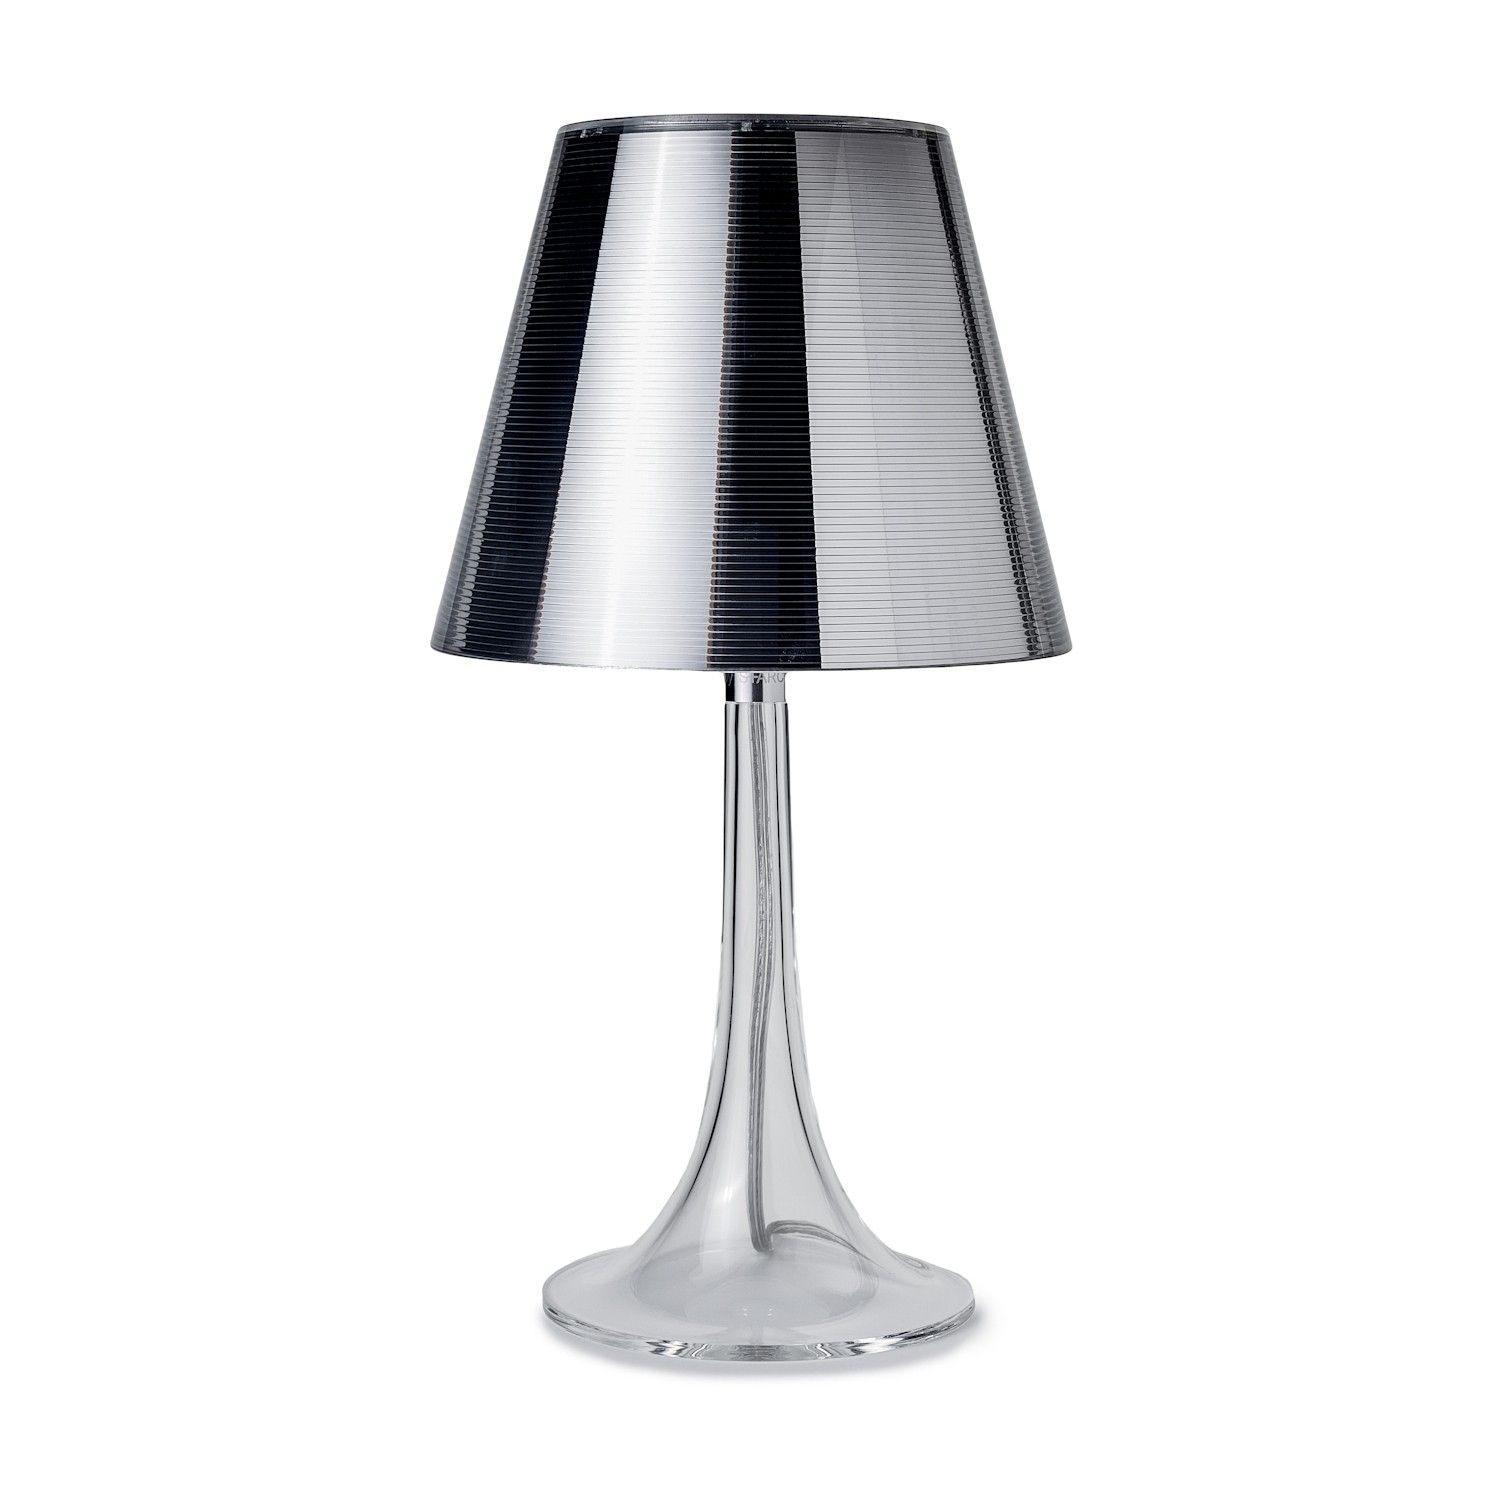 Furniture : Contemporary Desk Lamps Office Magnificent Table John Intended For John Lewis Living Room Table Lamps (Photo 8 of 15)